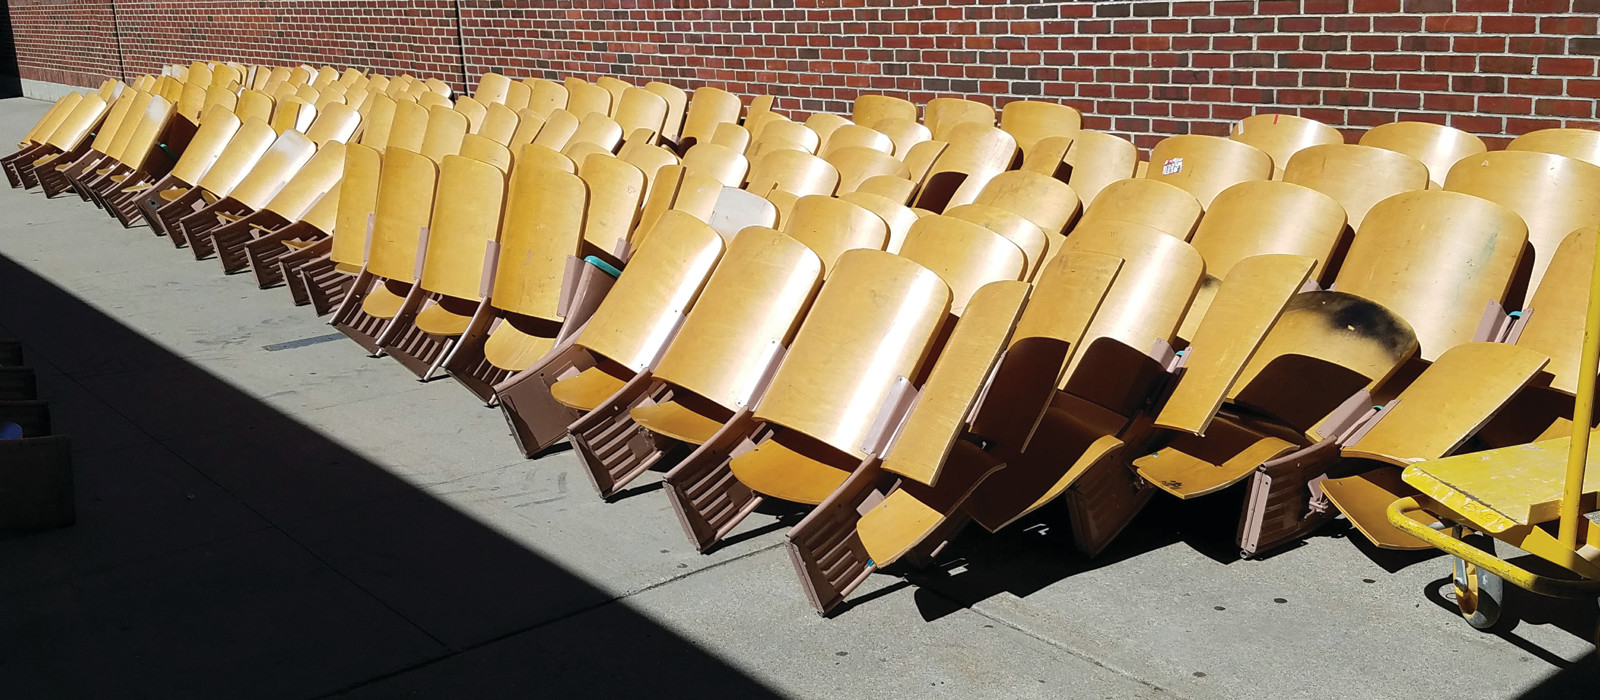 IF THESE SEATS COULD TALK: The auditorium seats lined the Cranston West walkways, waiting to be taken away. These same seats have seen 54 years of students sitting in them for school-wide events and community happenings, with generations of people utilizing the space for nearly 60 years.